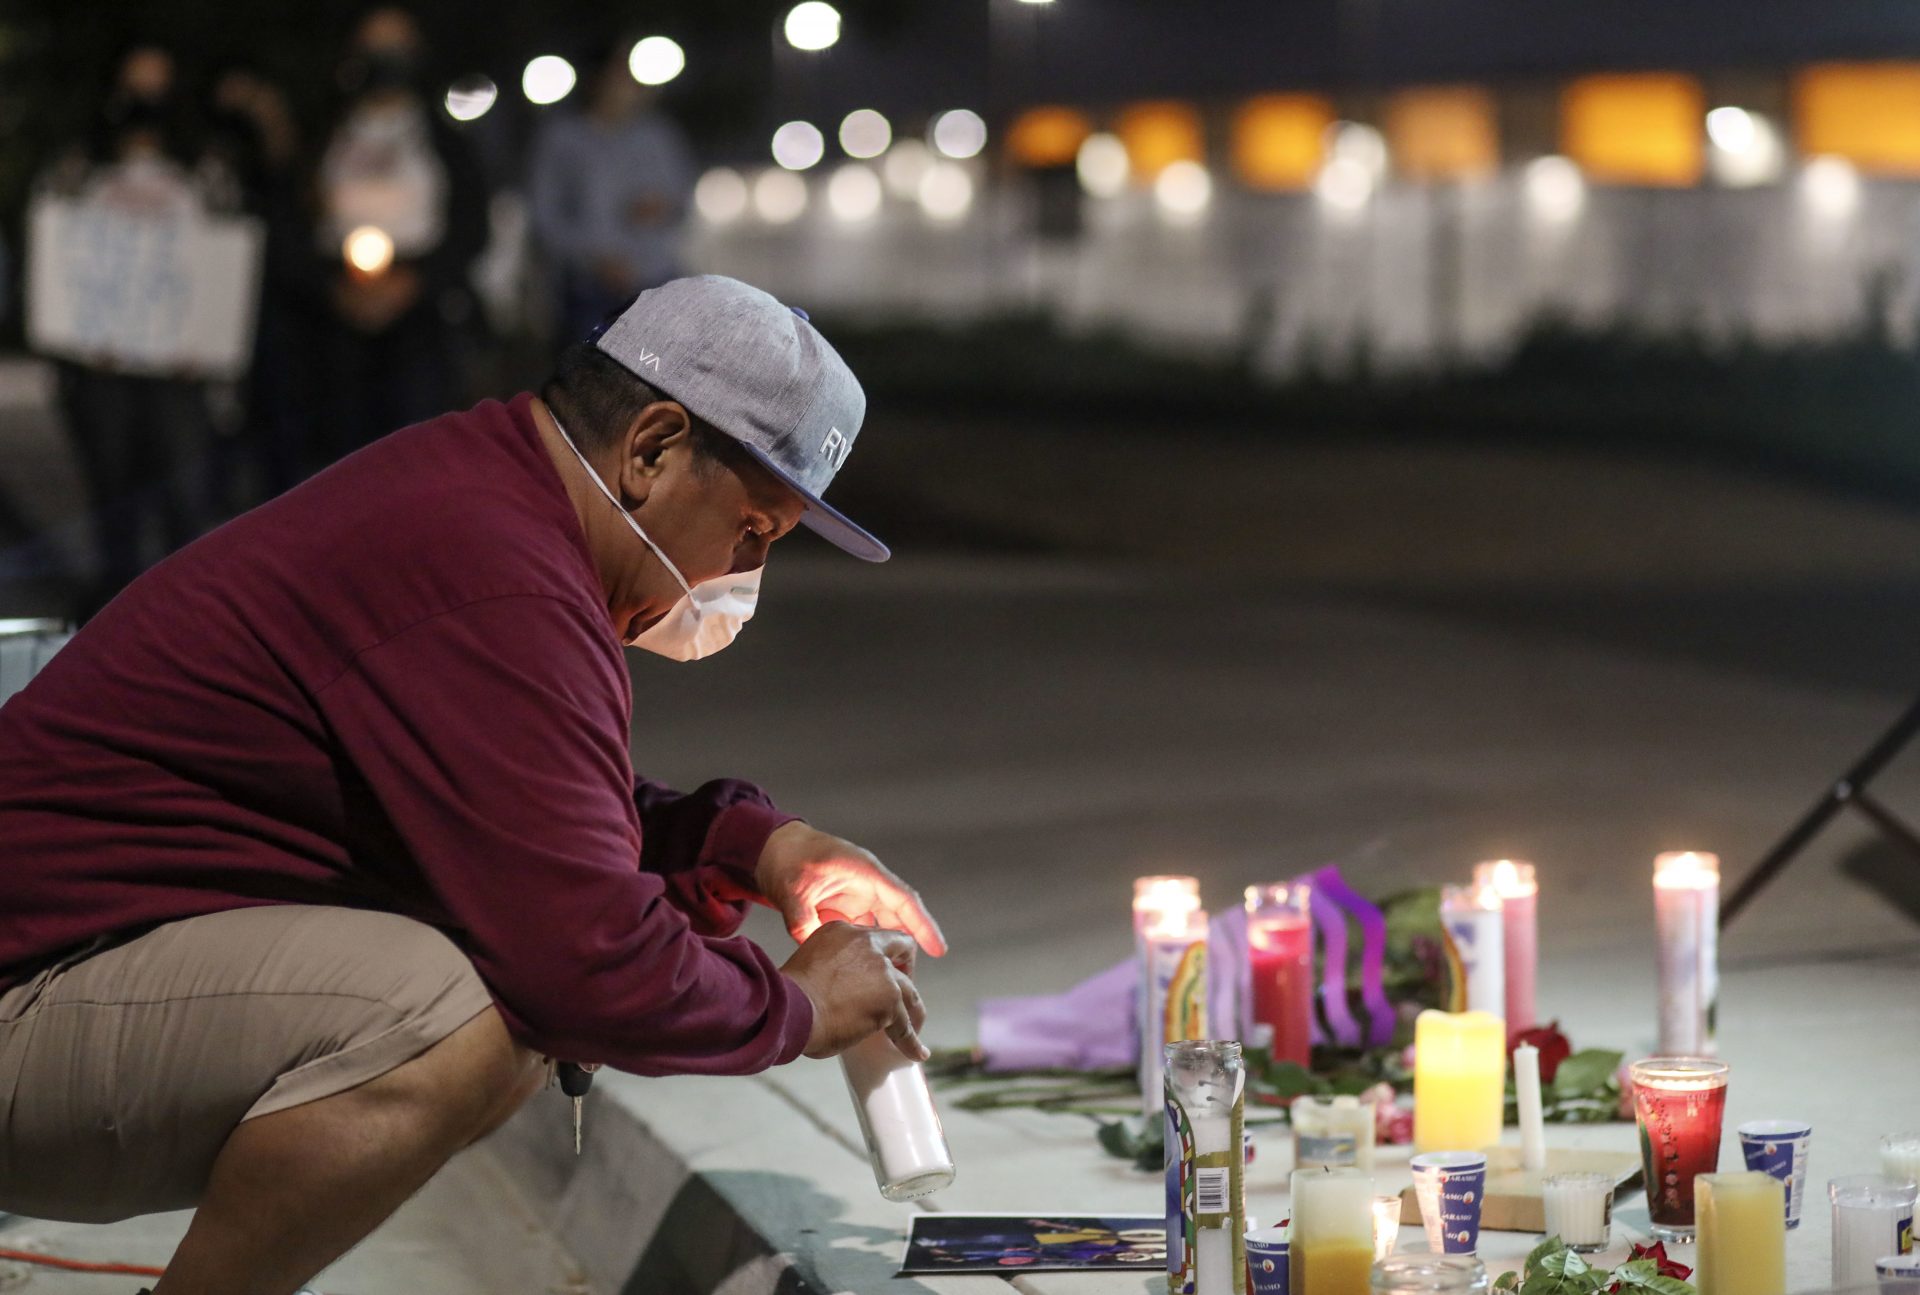 A man sets a candle outside the Otay Mesa Detention Center during a "Vigil for Carlos" on May 9 in San Diego. The vigil was held to commemorate Carlos Ernesto Escobar Mejia, who died of COVID-19-related symptoms at the detention center.